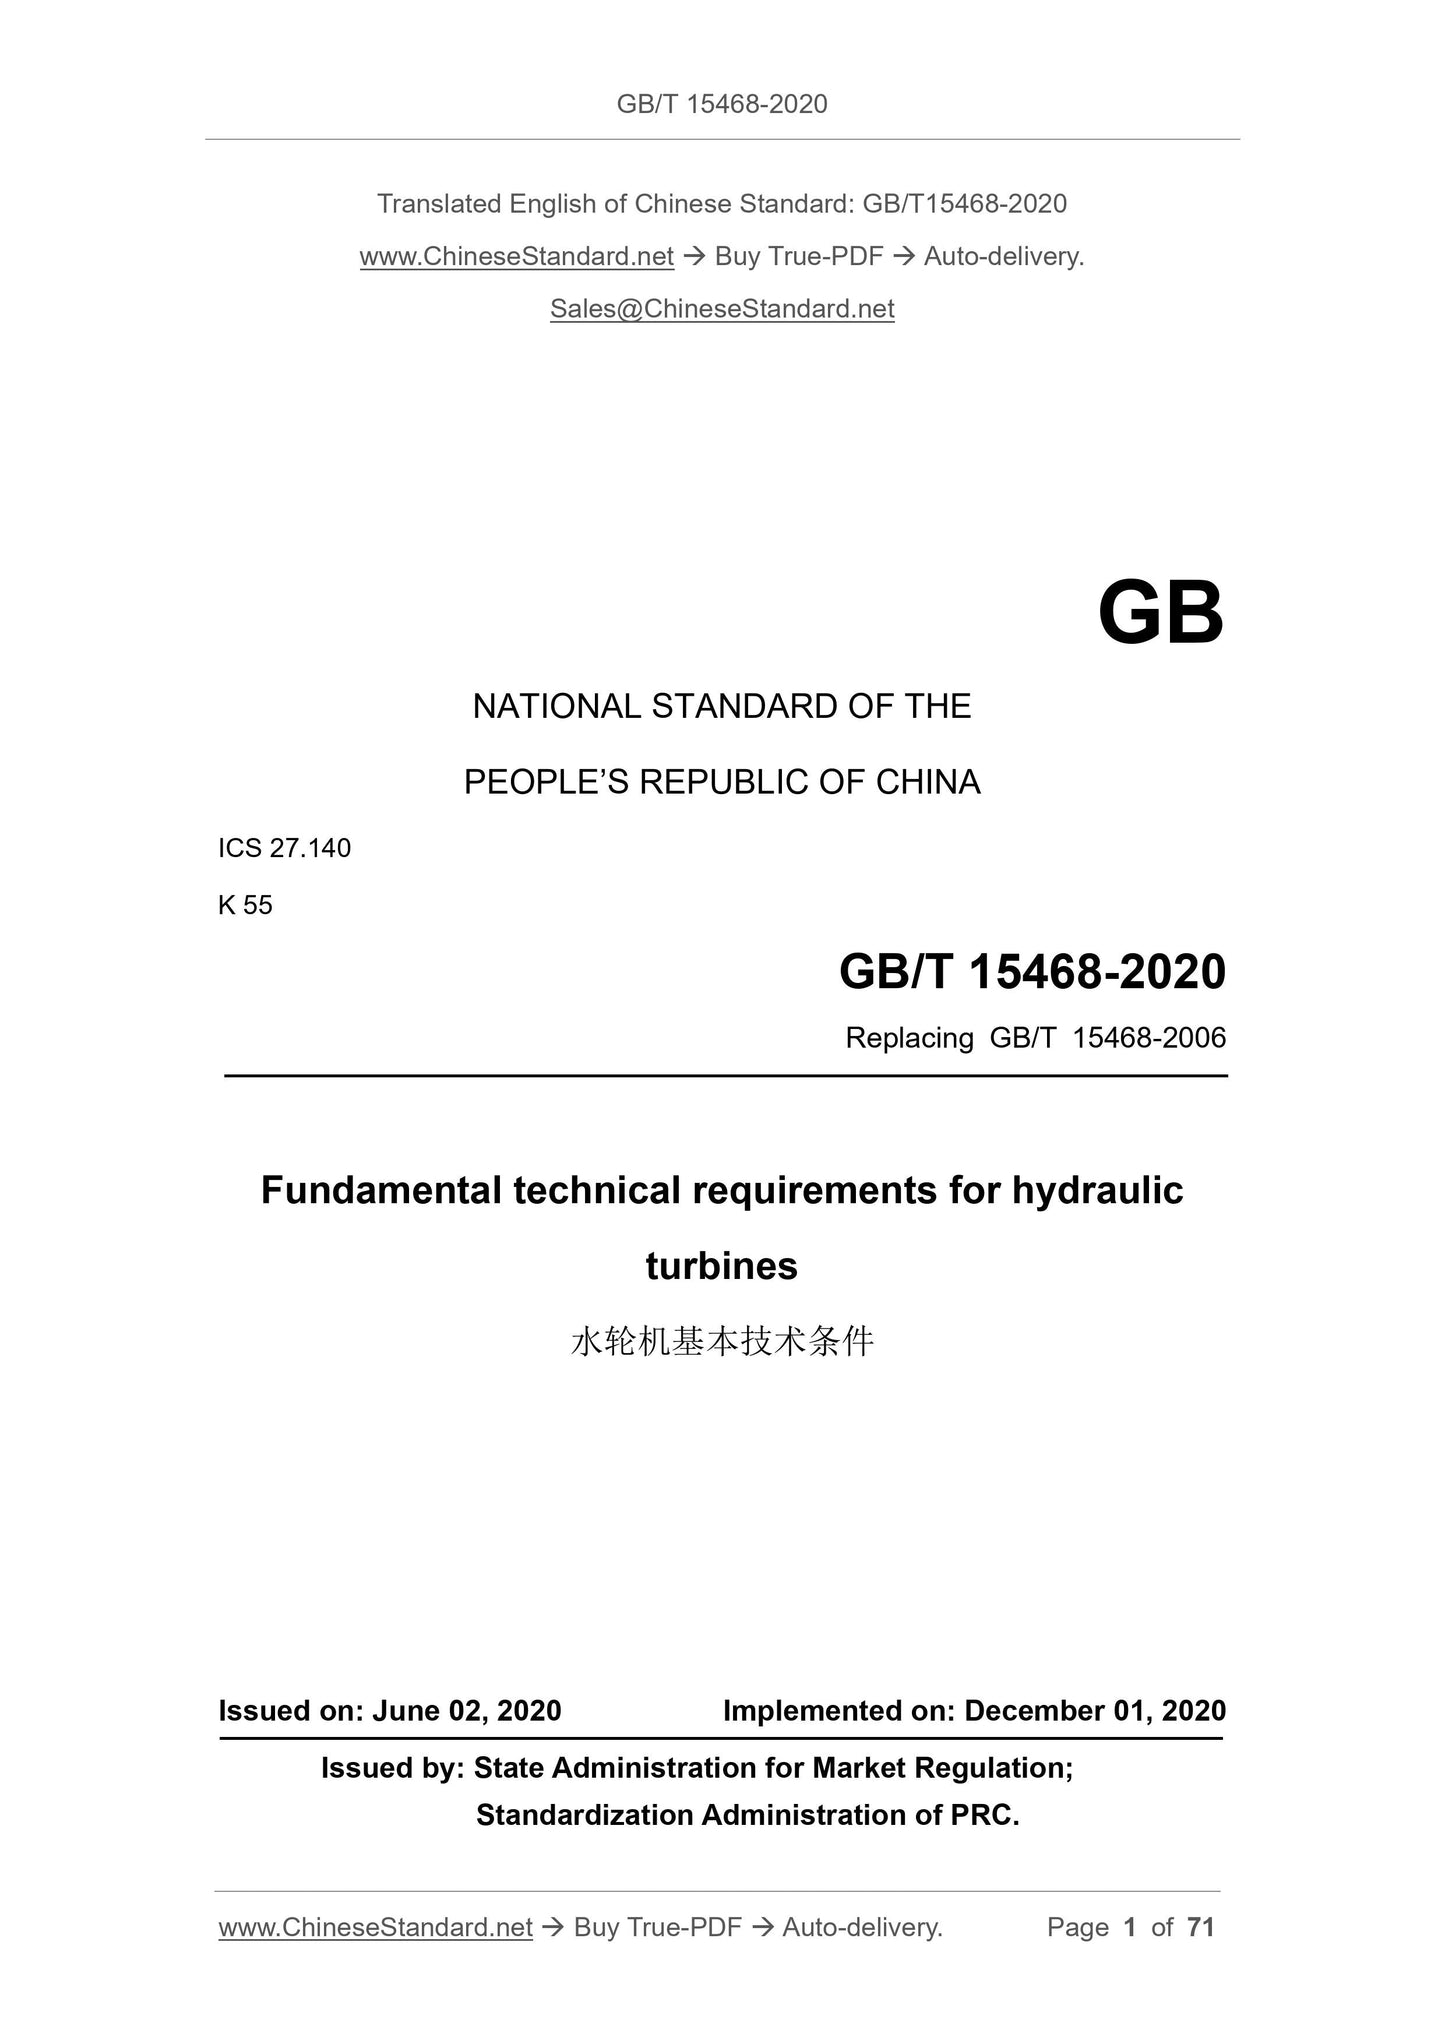 GB/T 15468-2020 Page 1